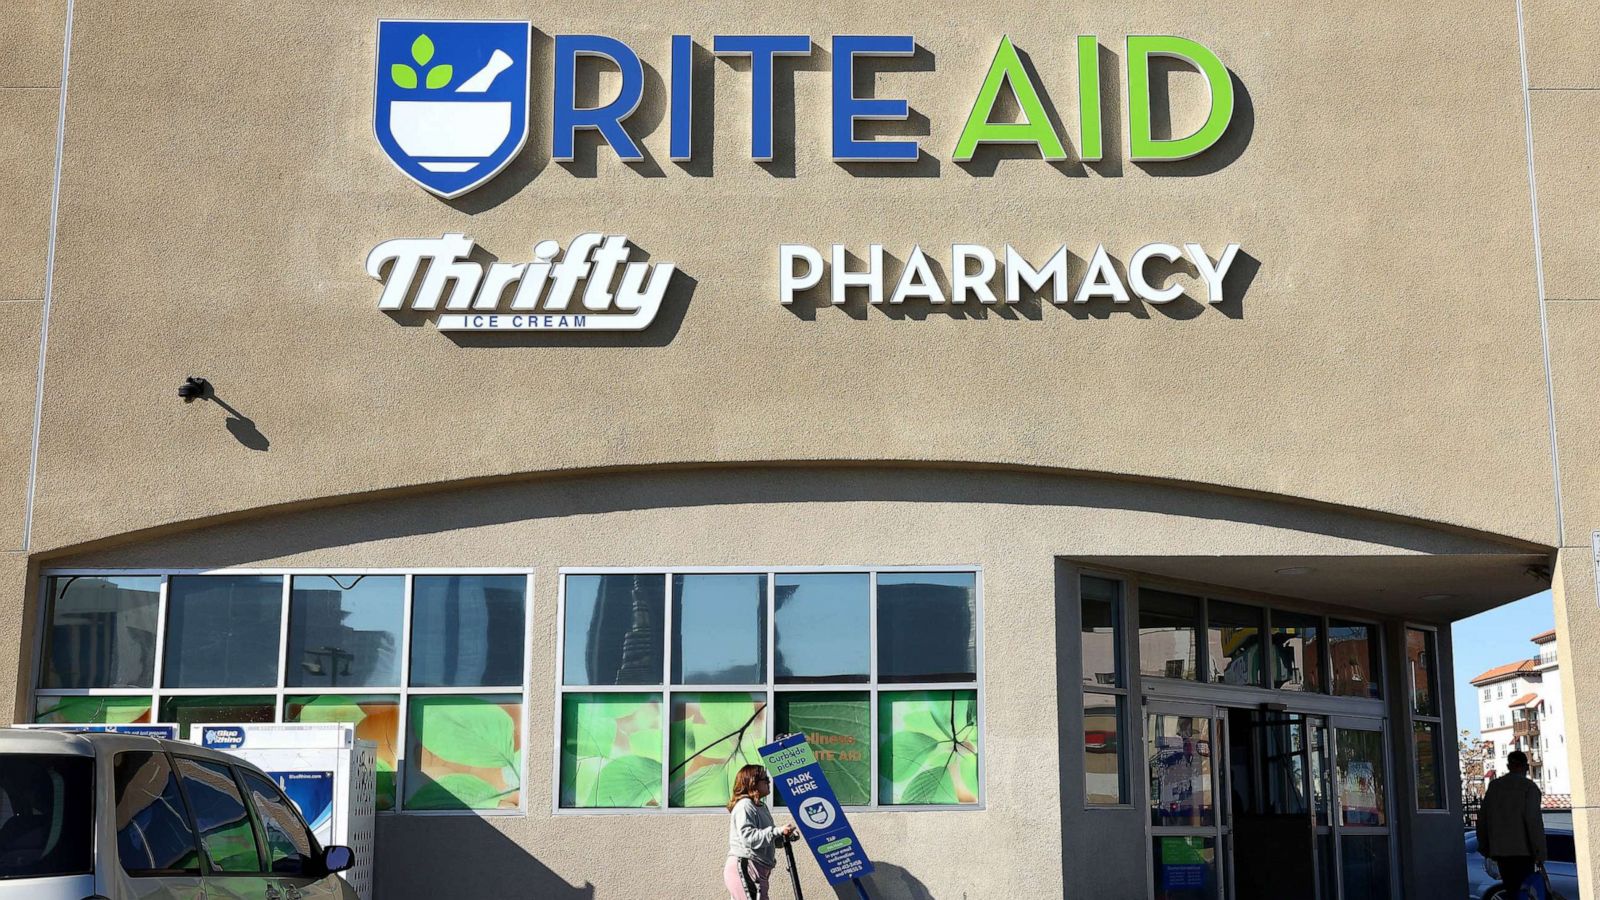 Rite Aid Is Filing For Bankruptcy: Here's What's Happened